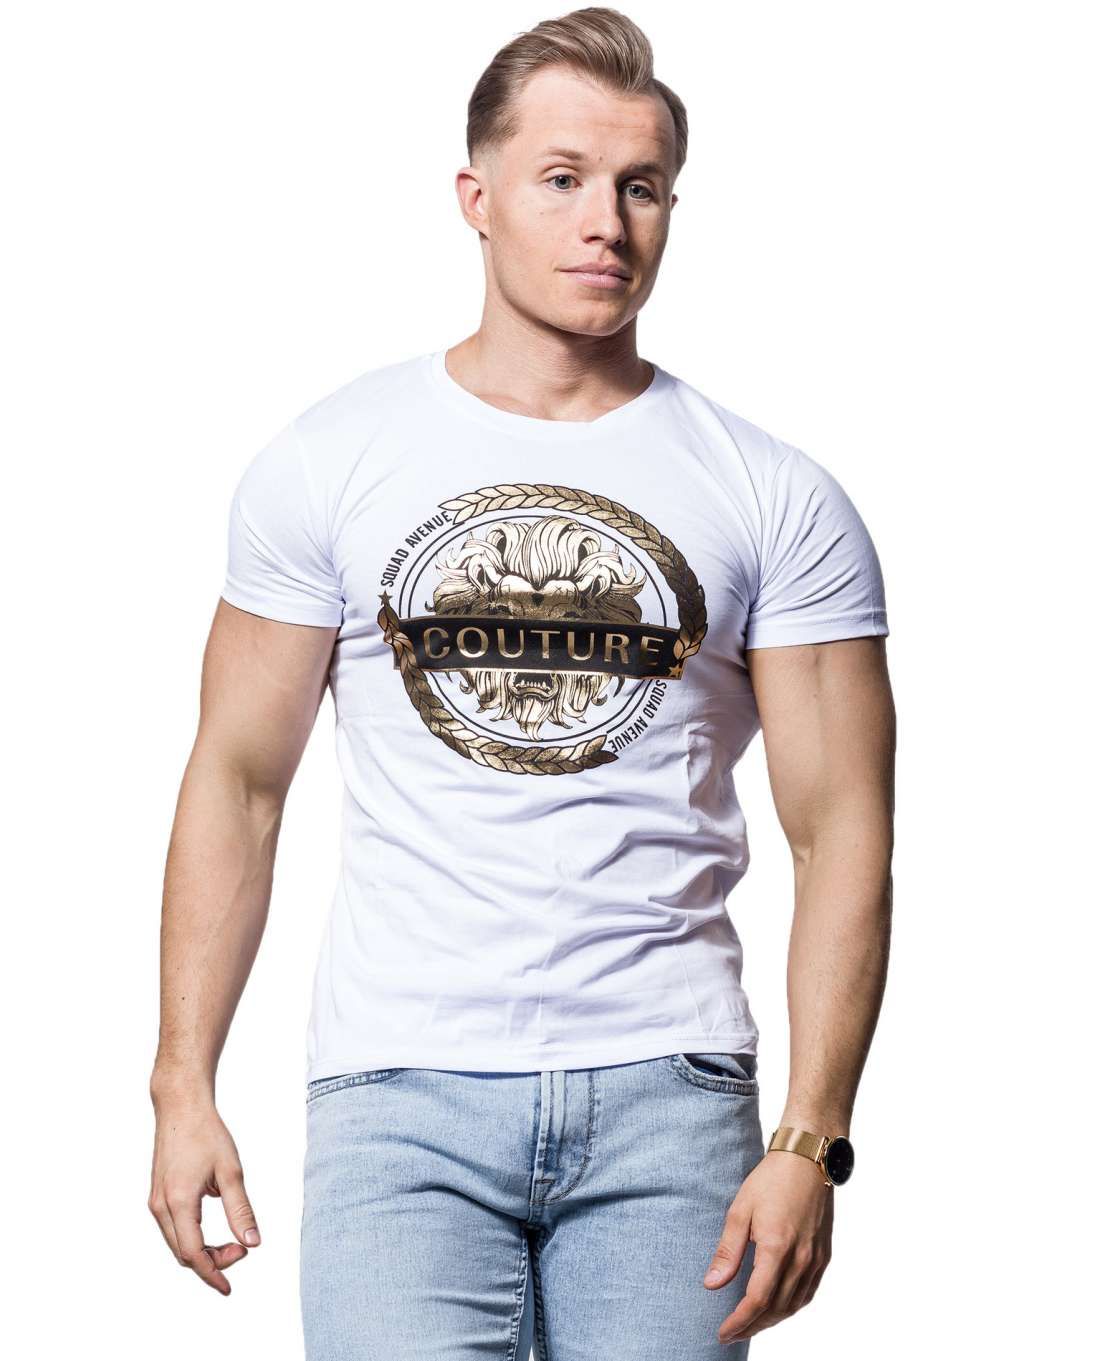 Tim Couture T-Shirt White Jerone